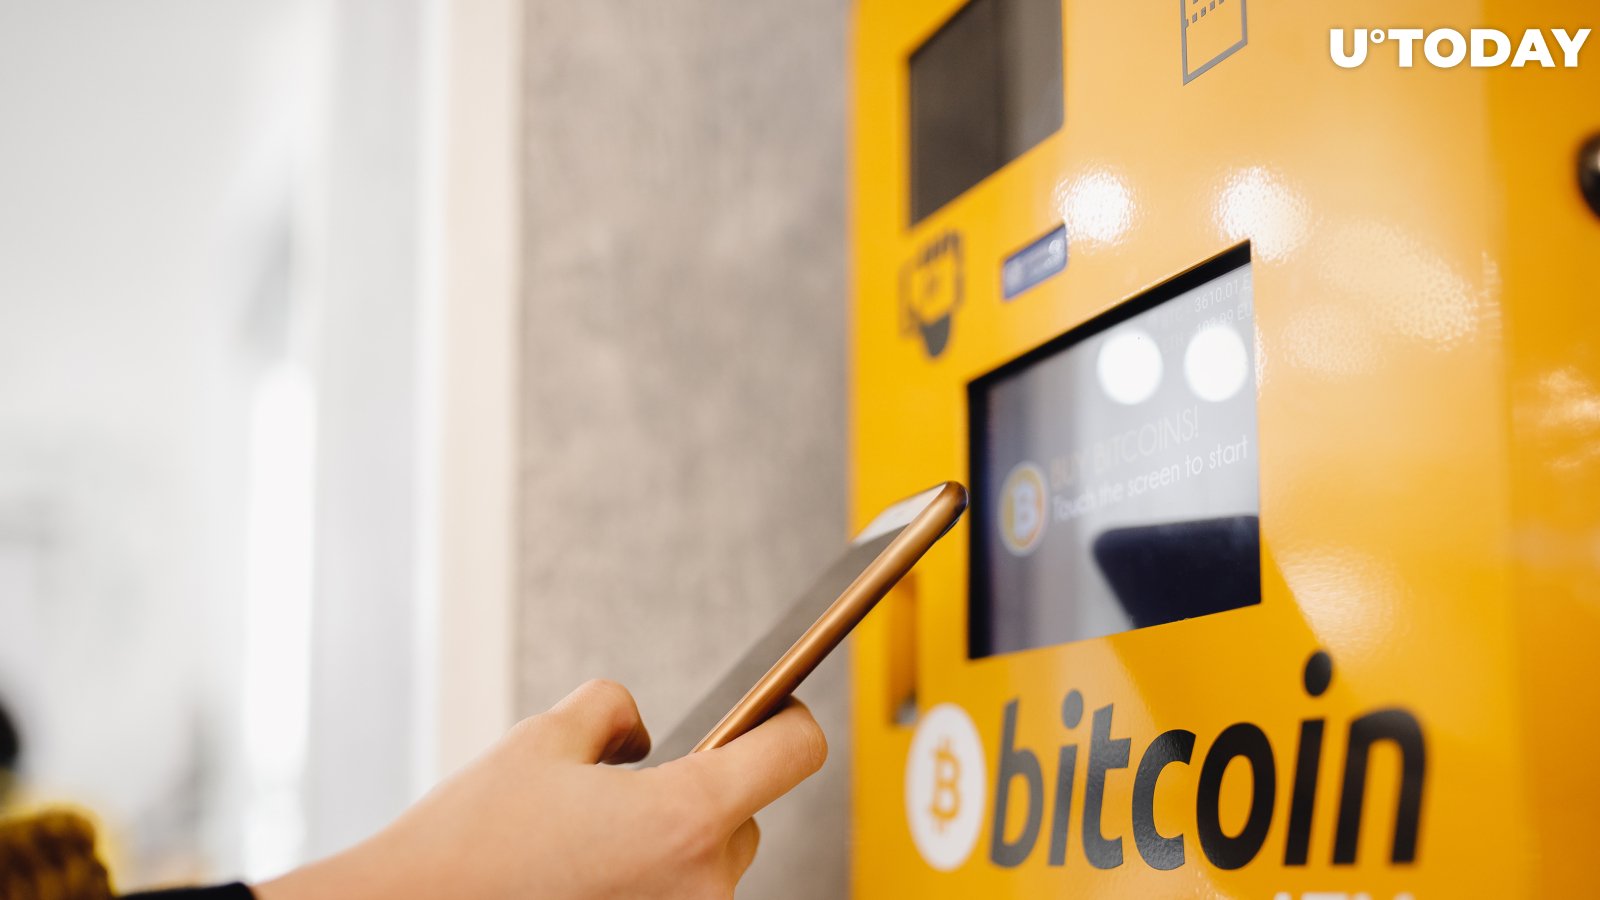 Europe’s Largest Electronics Retailer to Install Bitcoin ATMs